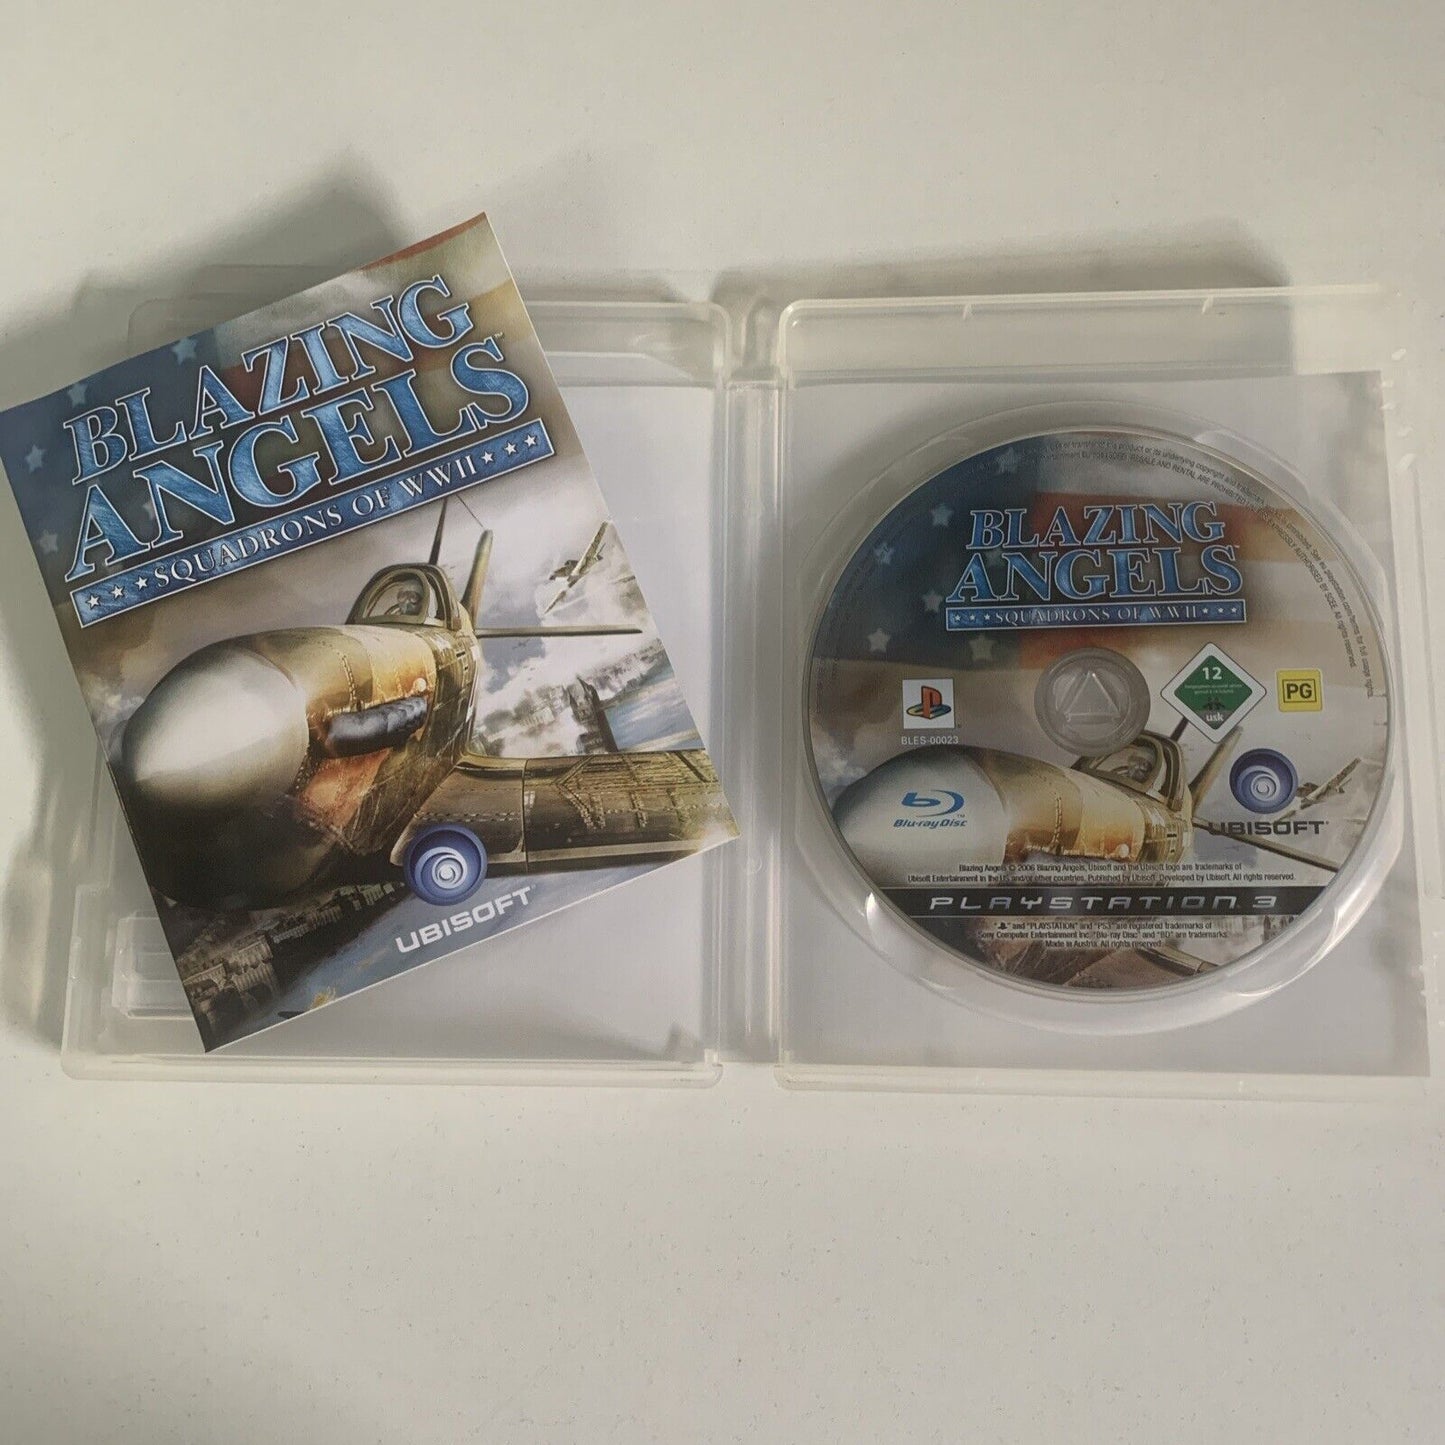 Blazing Angels: Squadrons of WWII PlayStation 3 PS3 Game